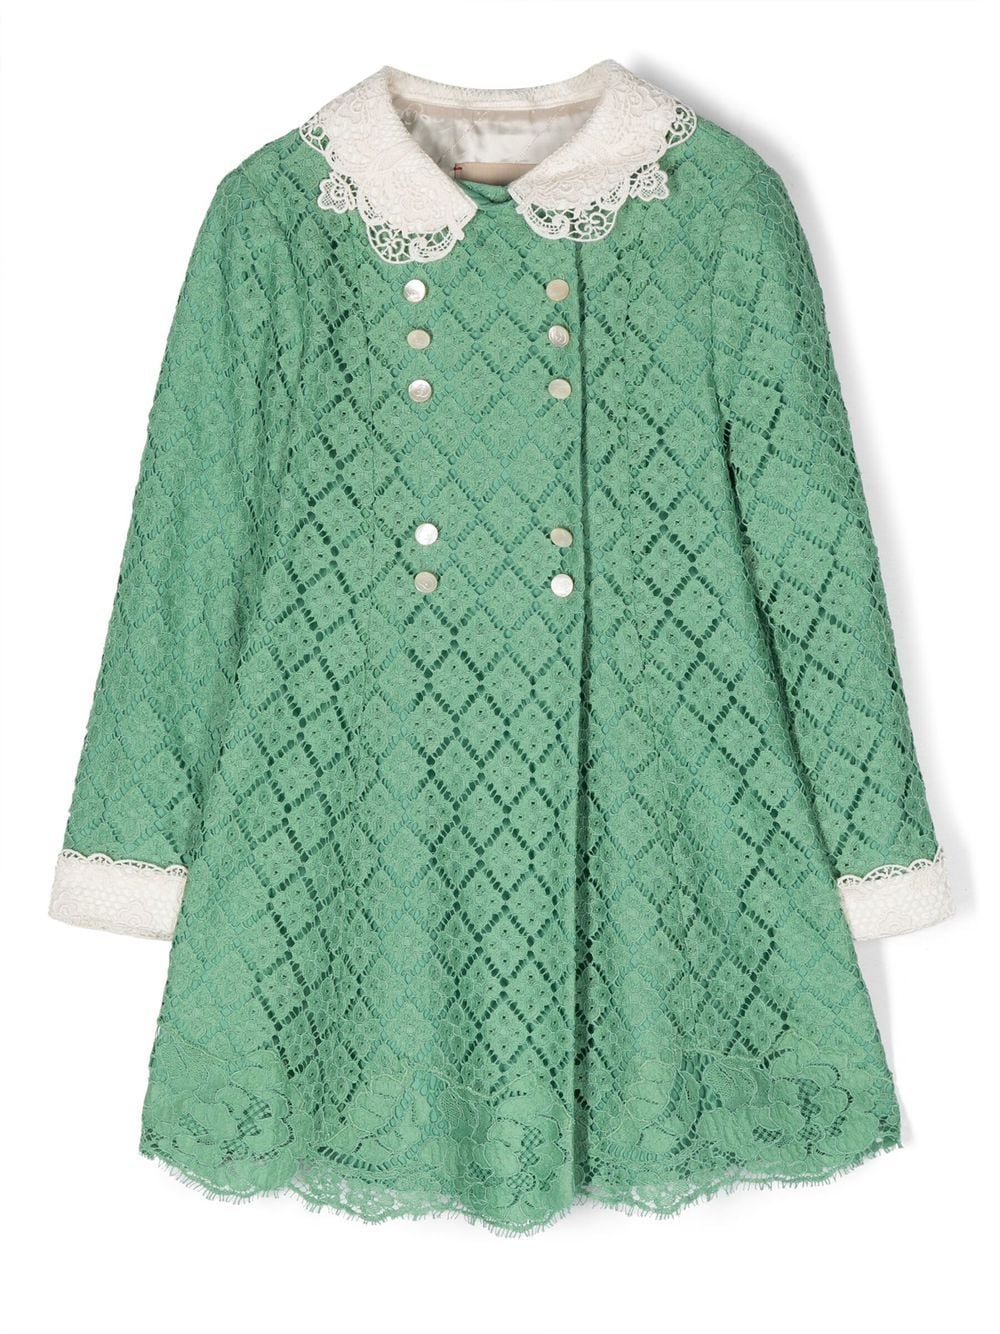 Gucci Kids double-breasted lace embroidery jacket - Green von Gucci Kids